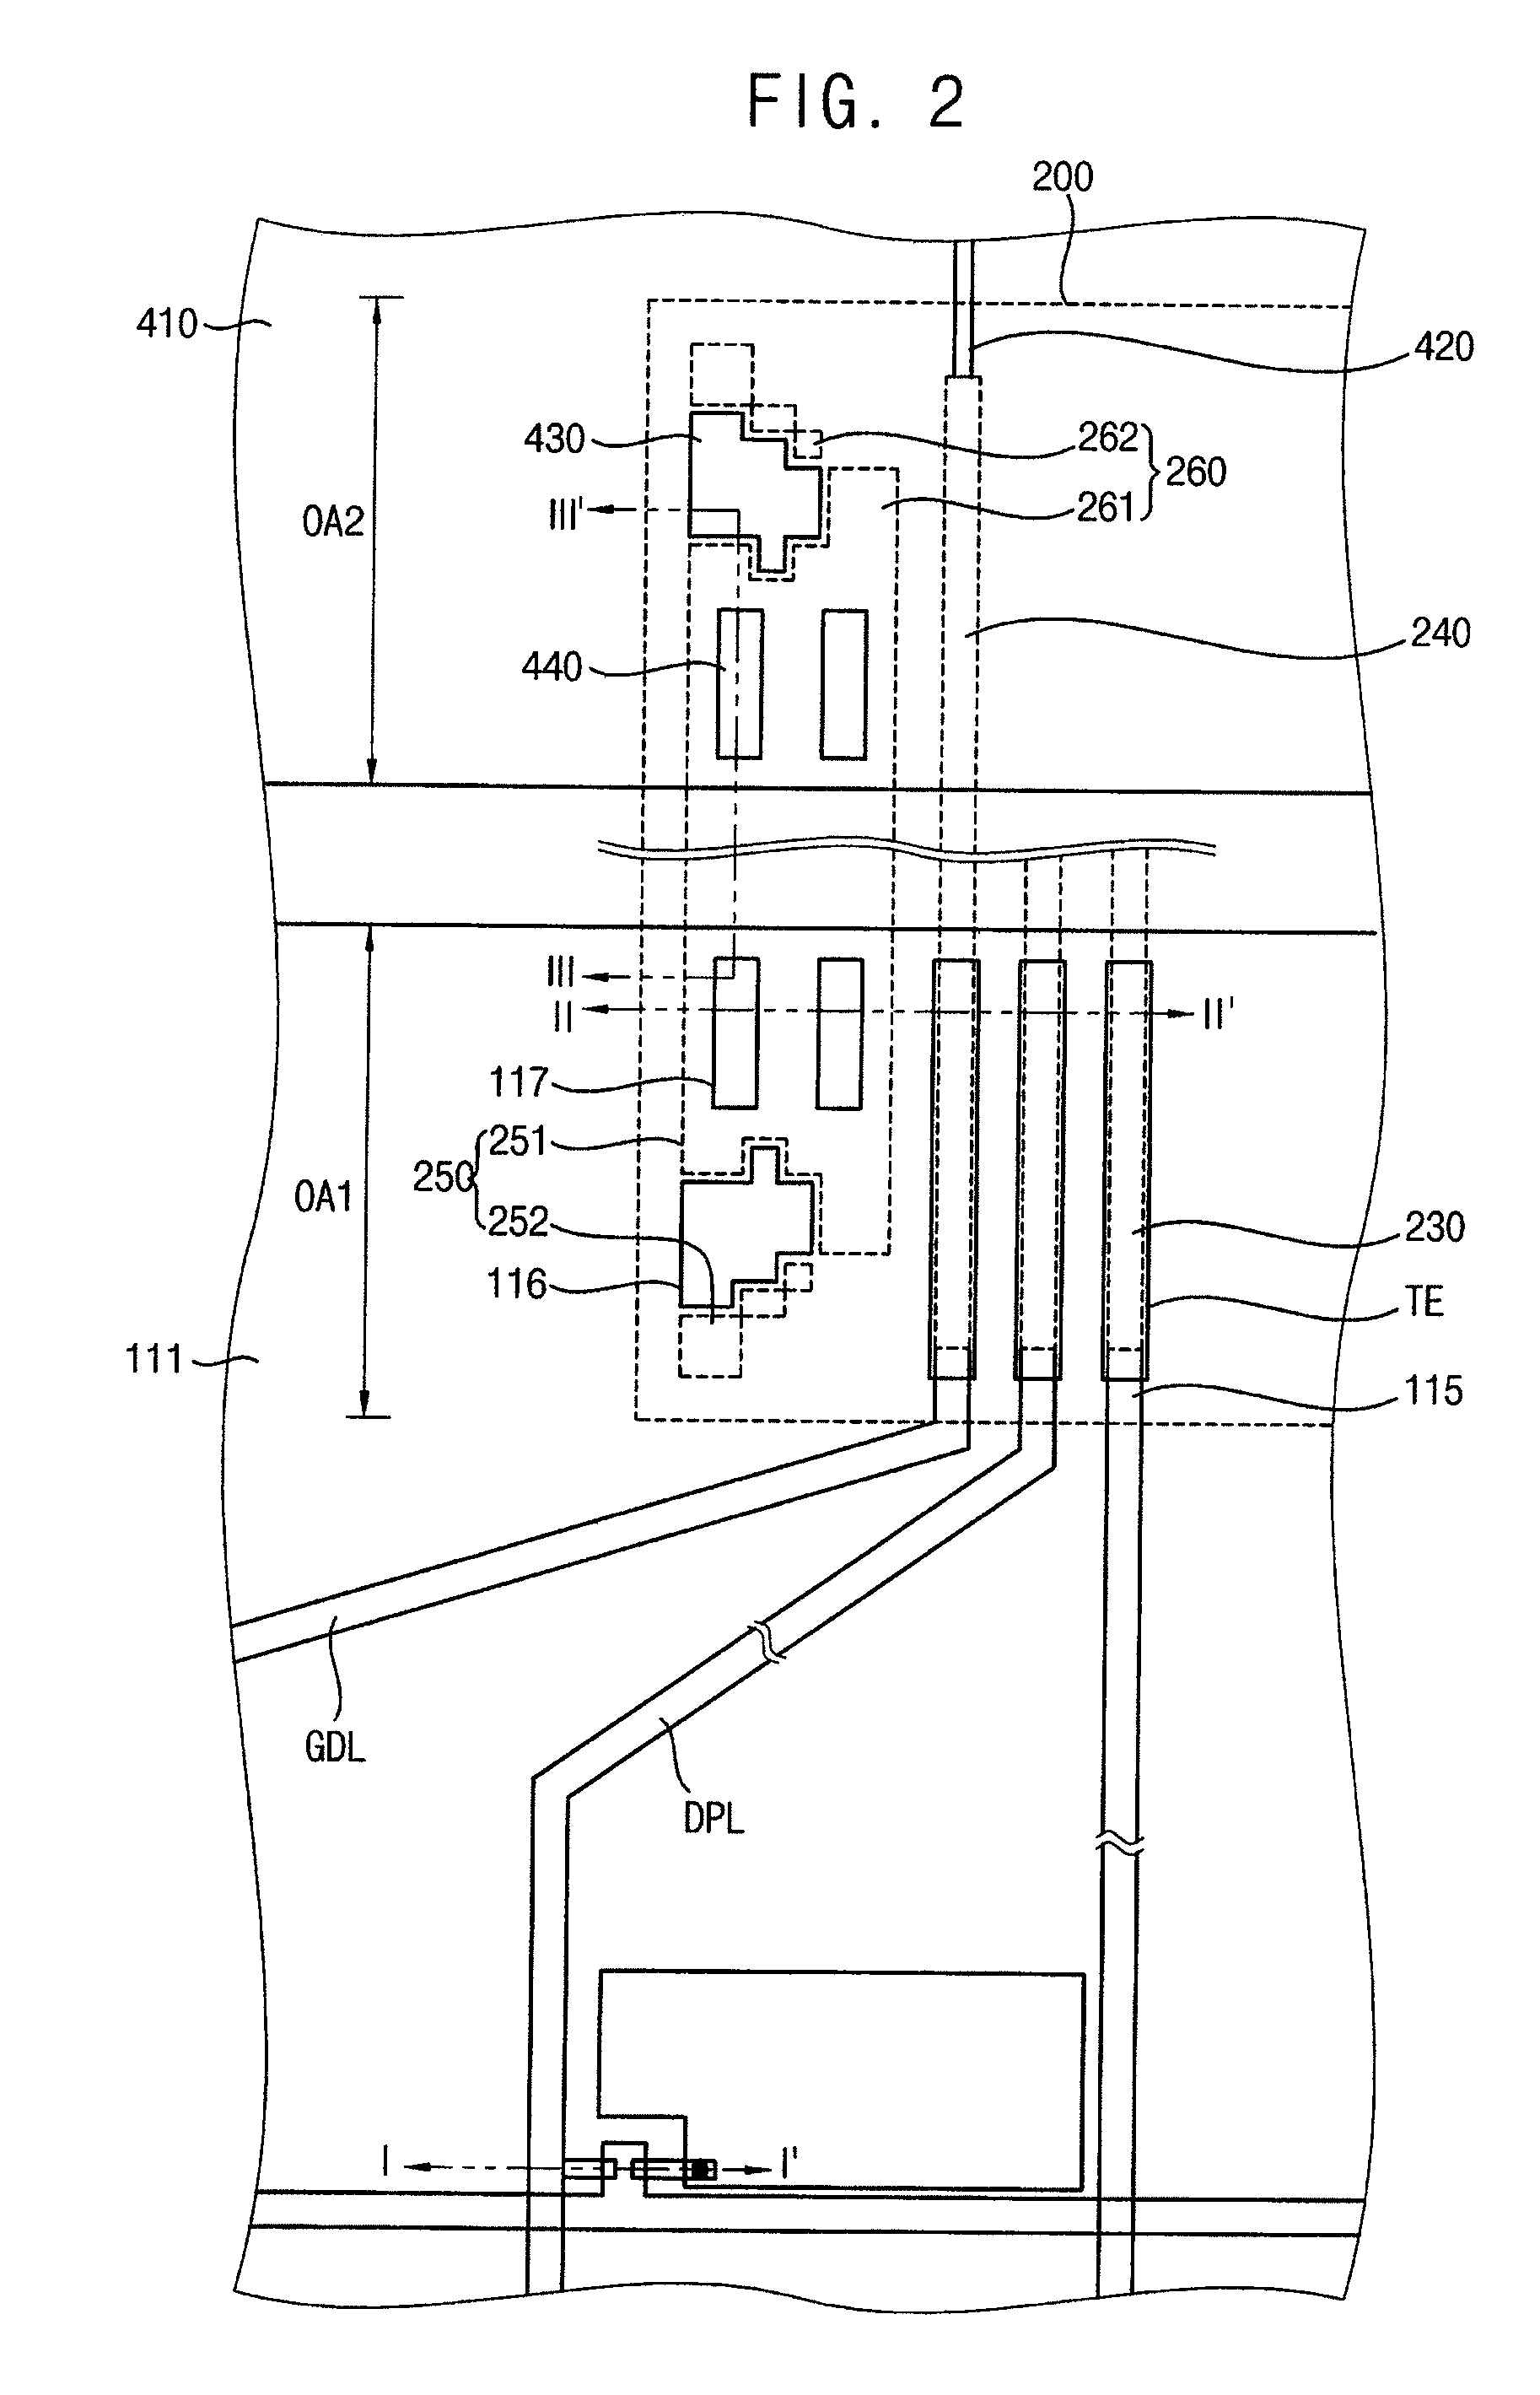 Display device and a method of manufacturing the same